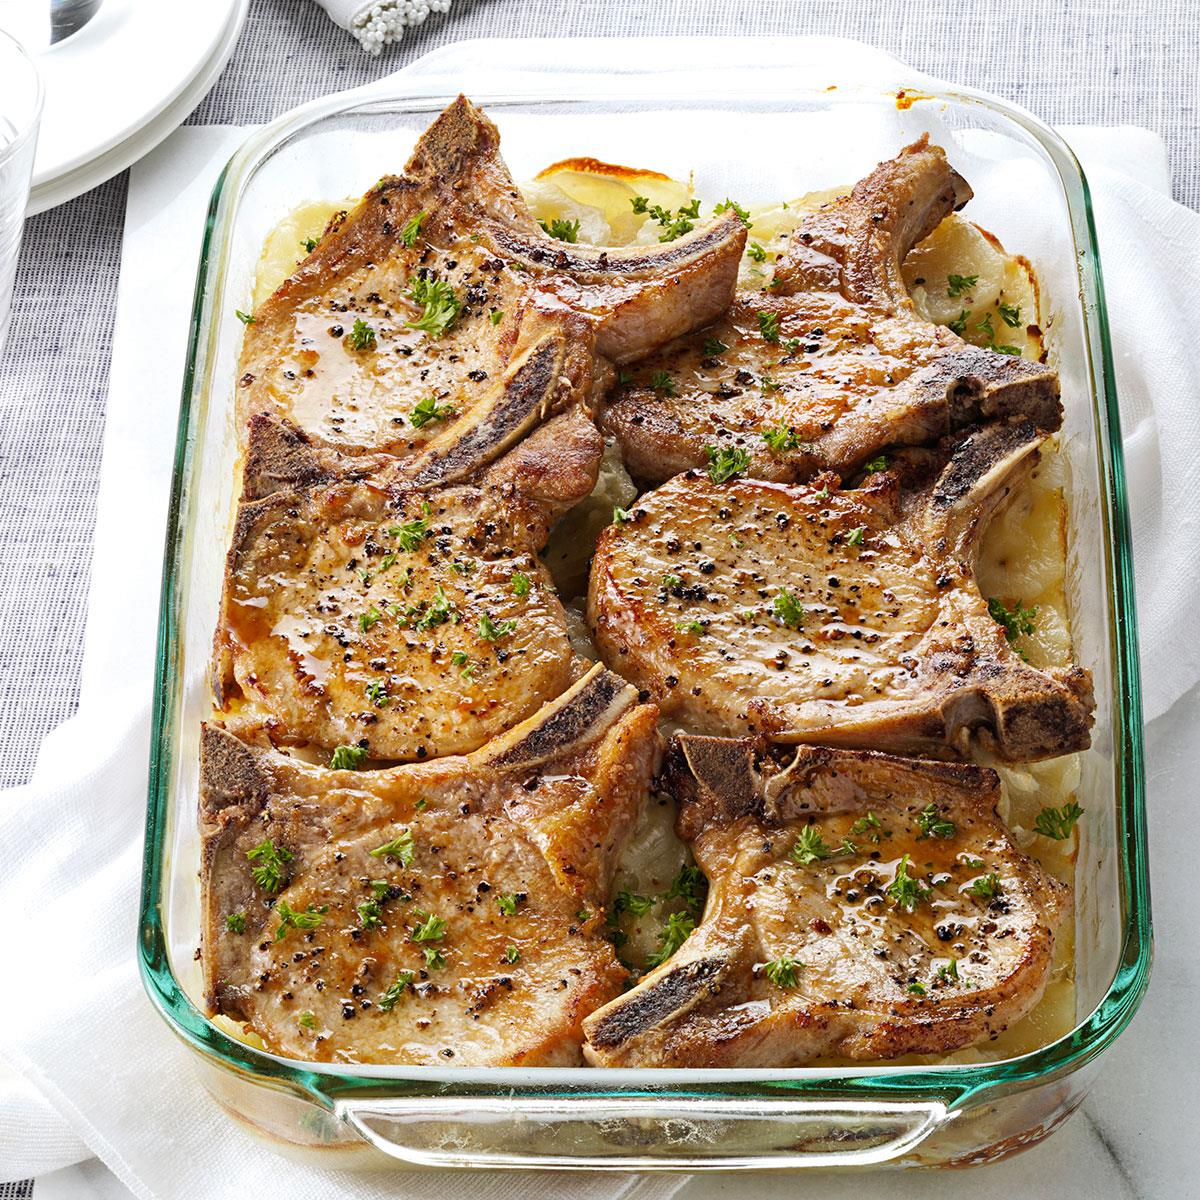 10 Amazing Ideas For Dinner With Pork Chops pork chops with scalloped potatoes recipe taste of home 2 2024